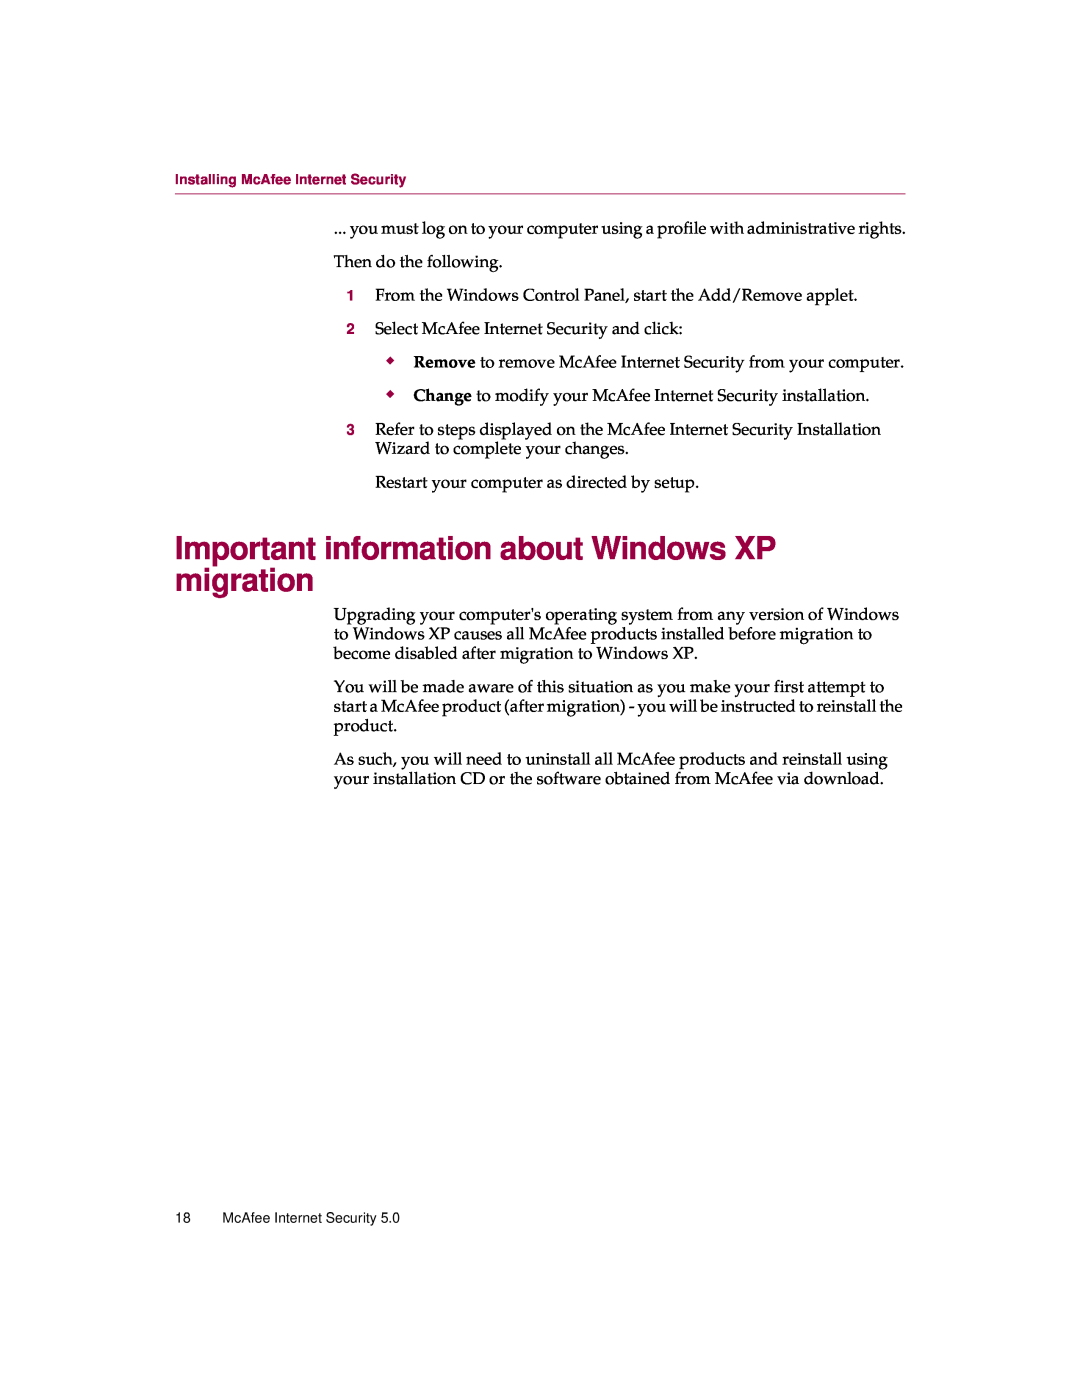 McAfee 5 manual Important information about Windows XP migration 